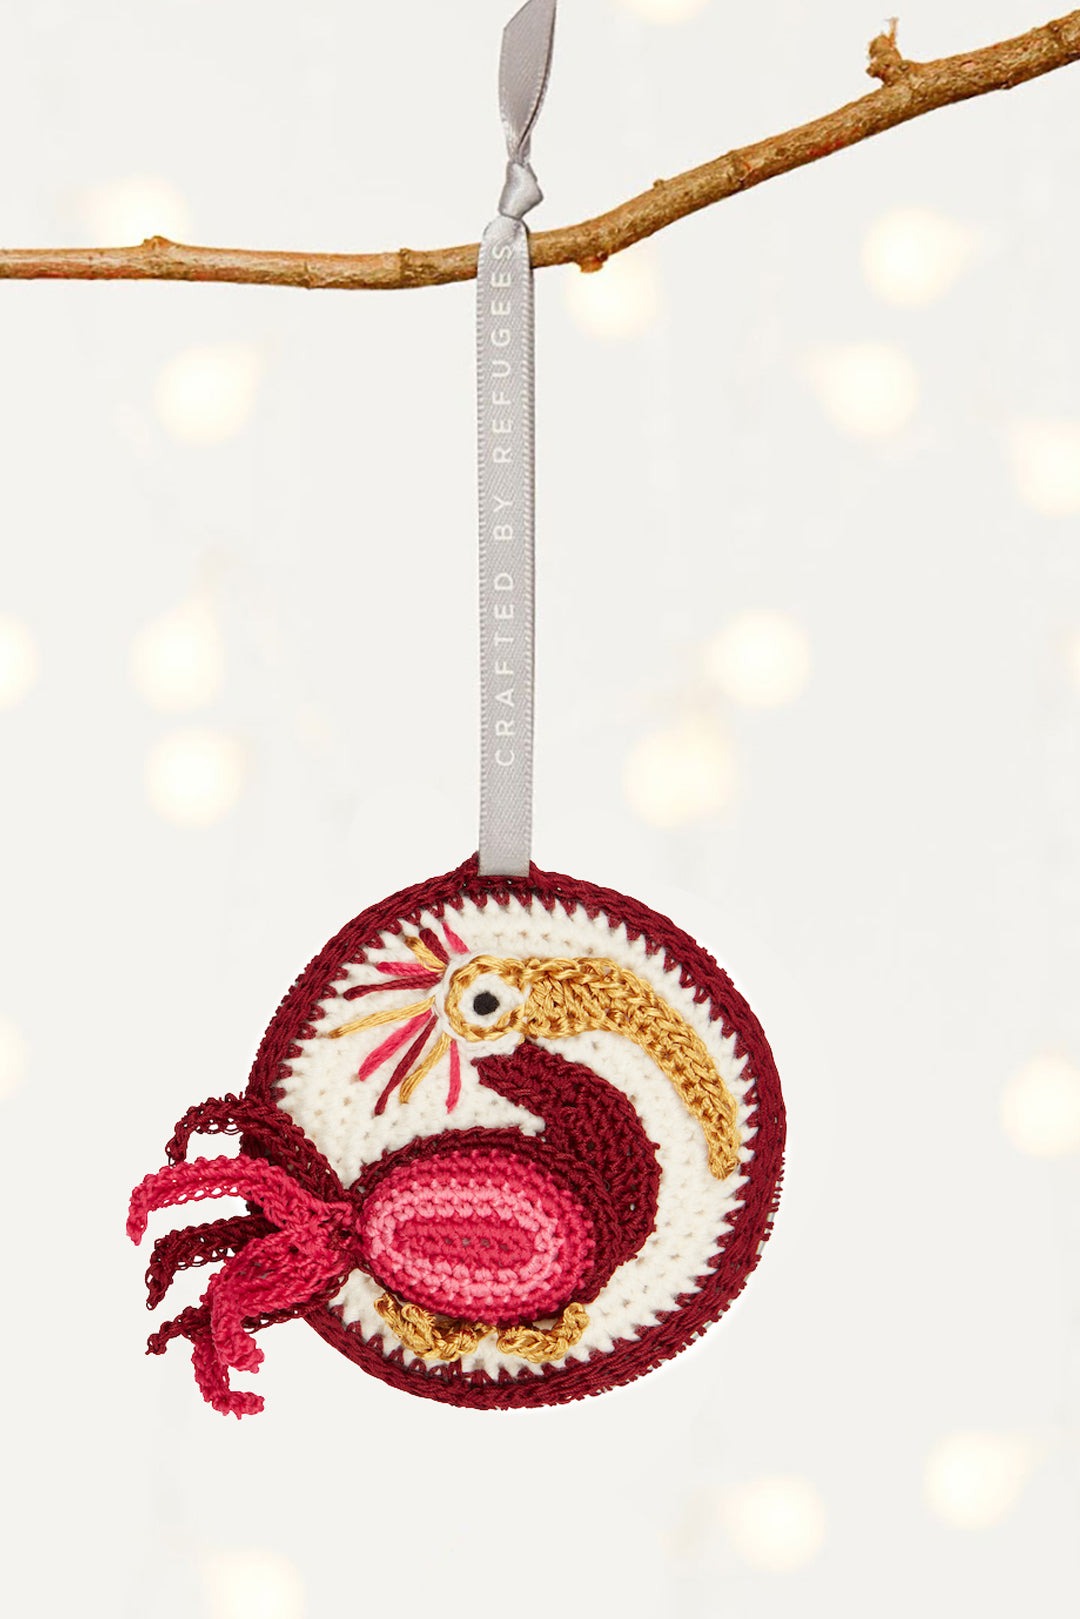 Brave Ibis Ornament, Made by Refugees - UN Refugee Agency